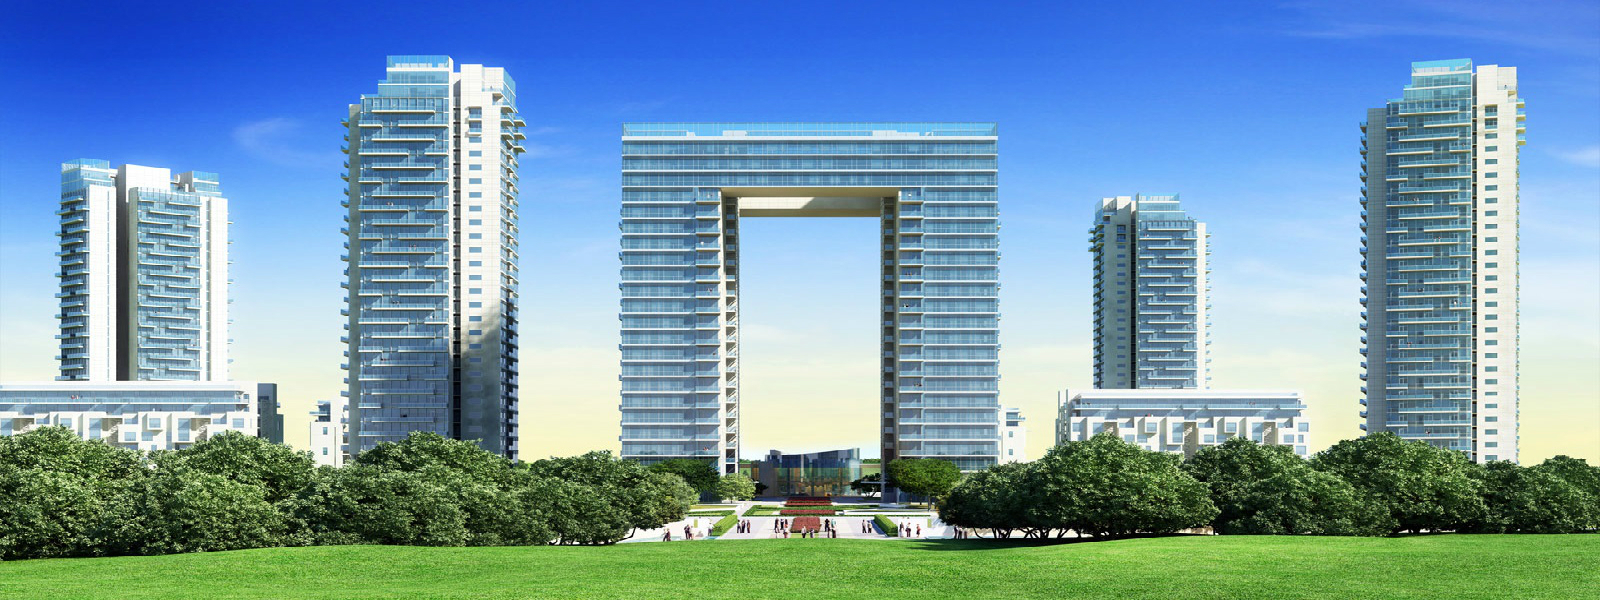 The Grand Arch Luxury Apartments